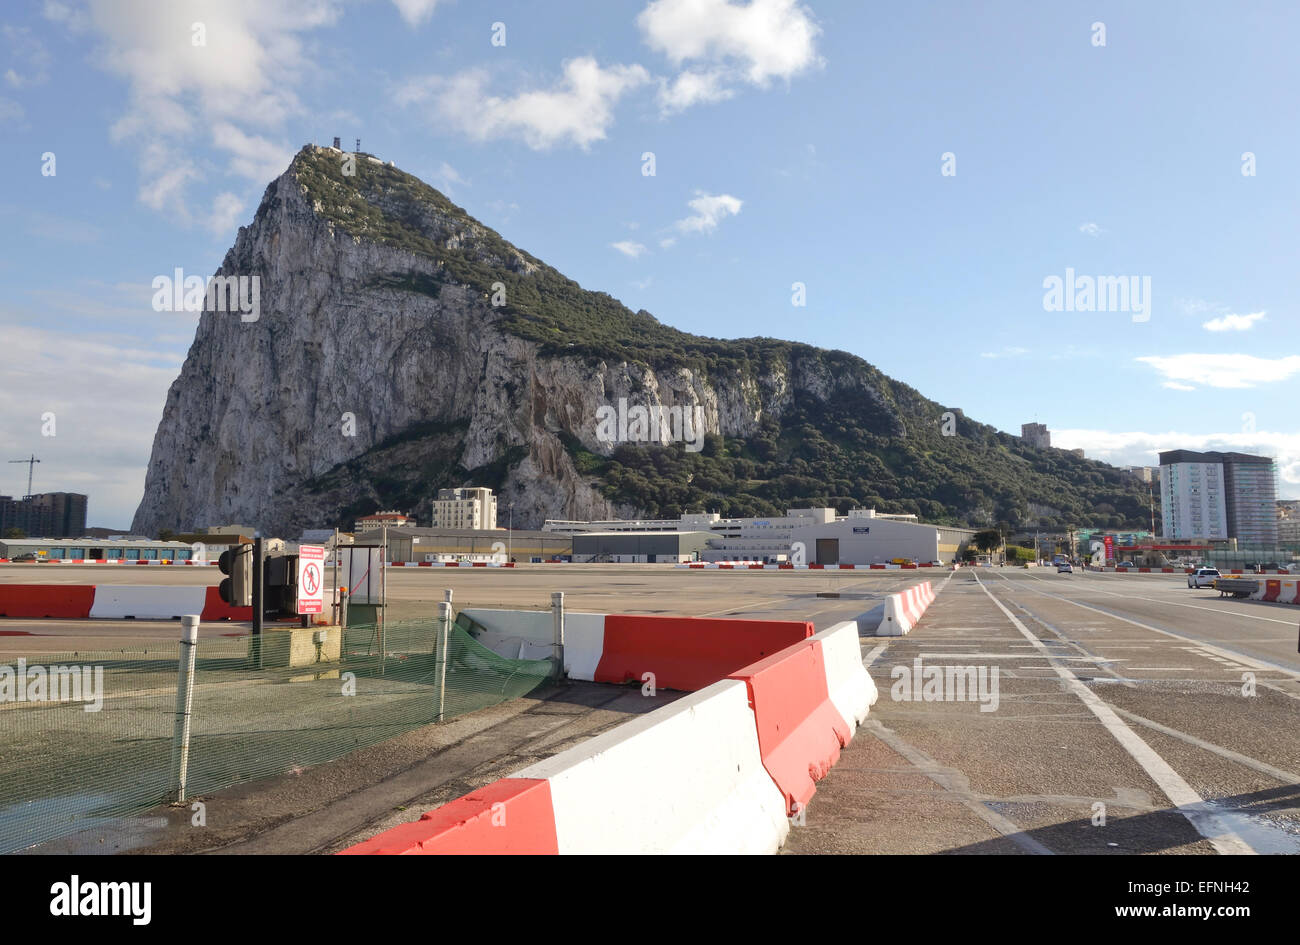 Gibraltar rock. Cars and pedestrians cross the runway of Gibraltar airport at the border of Spain to enter Gibraltar. Uk. United Kingdom. Stock Photo